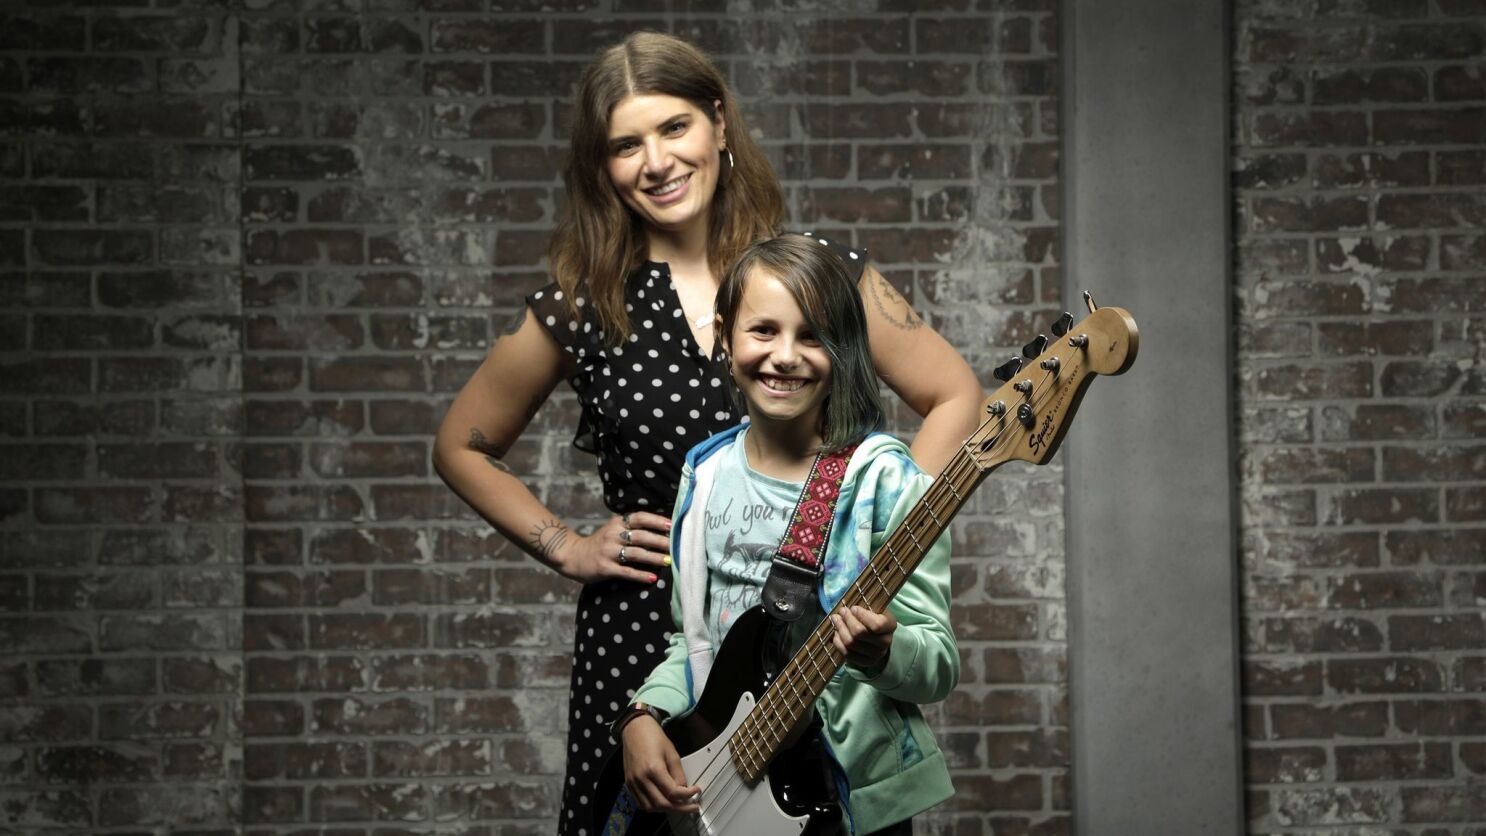 Best Coast S Bethany Cosentino Talks With A Kid About Her New Kids Album Los Angeles Times